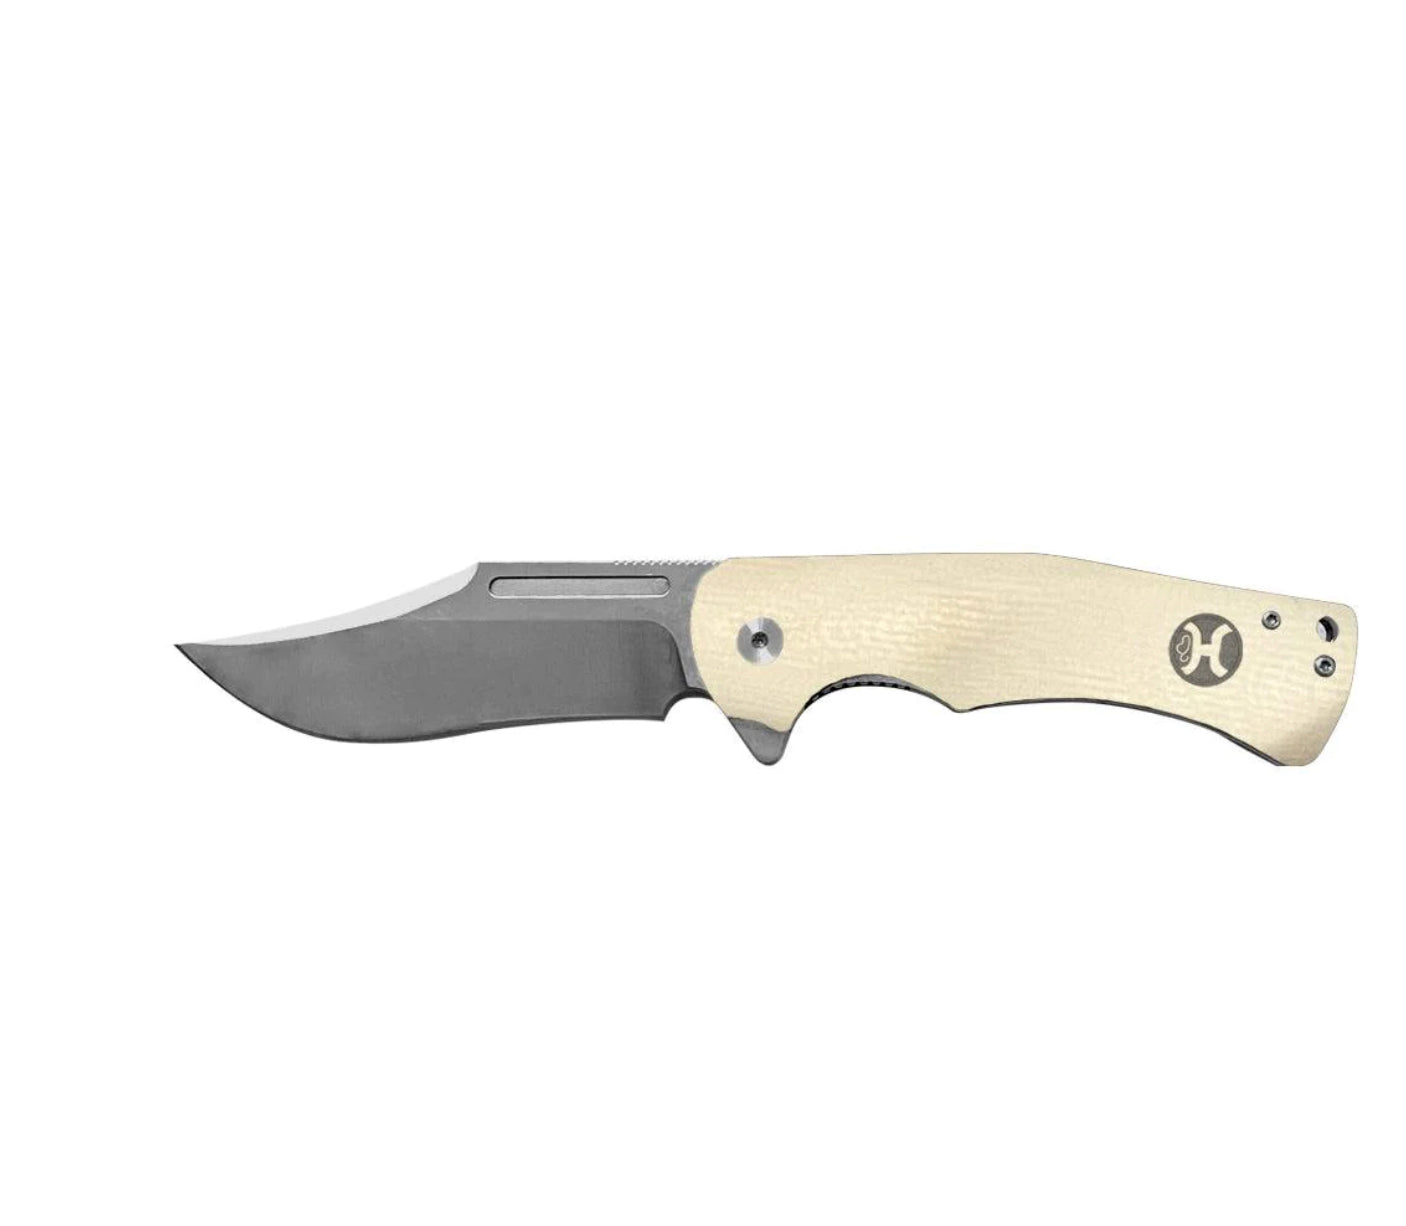 HOOEY KNIFE, WHITE CLIP POINT FLIPPER 3.25” BLADE WITH A 4.25” HANDLE